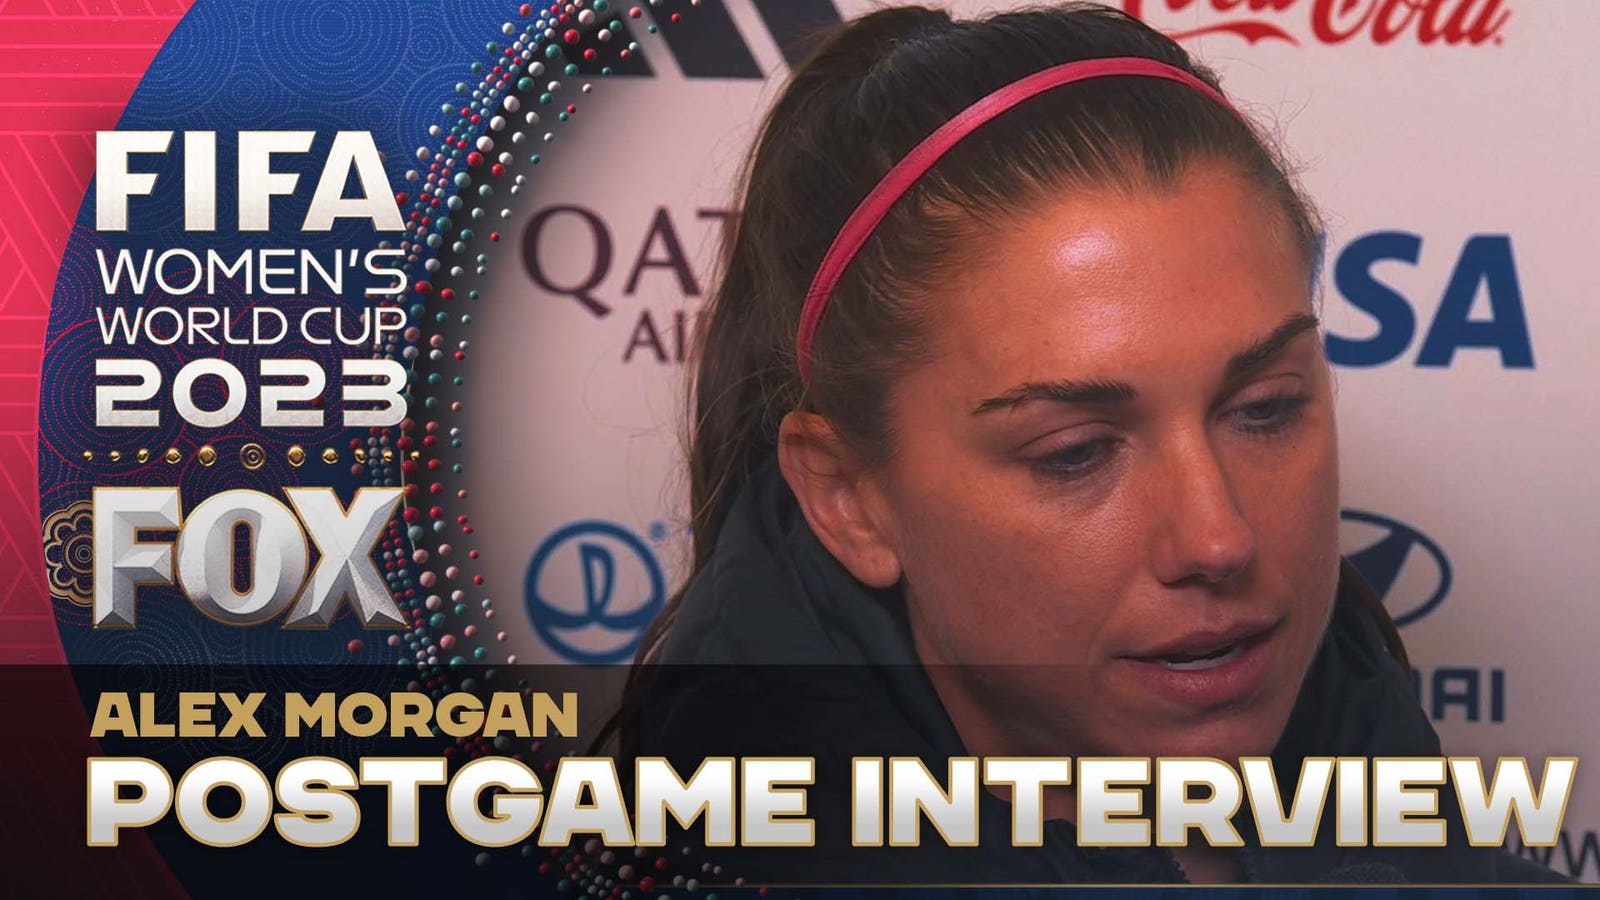 'It feels like a bad dream' - Alex Morgan on feelings after USWNT is eliminated by Sweden